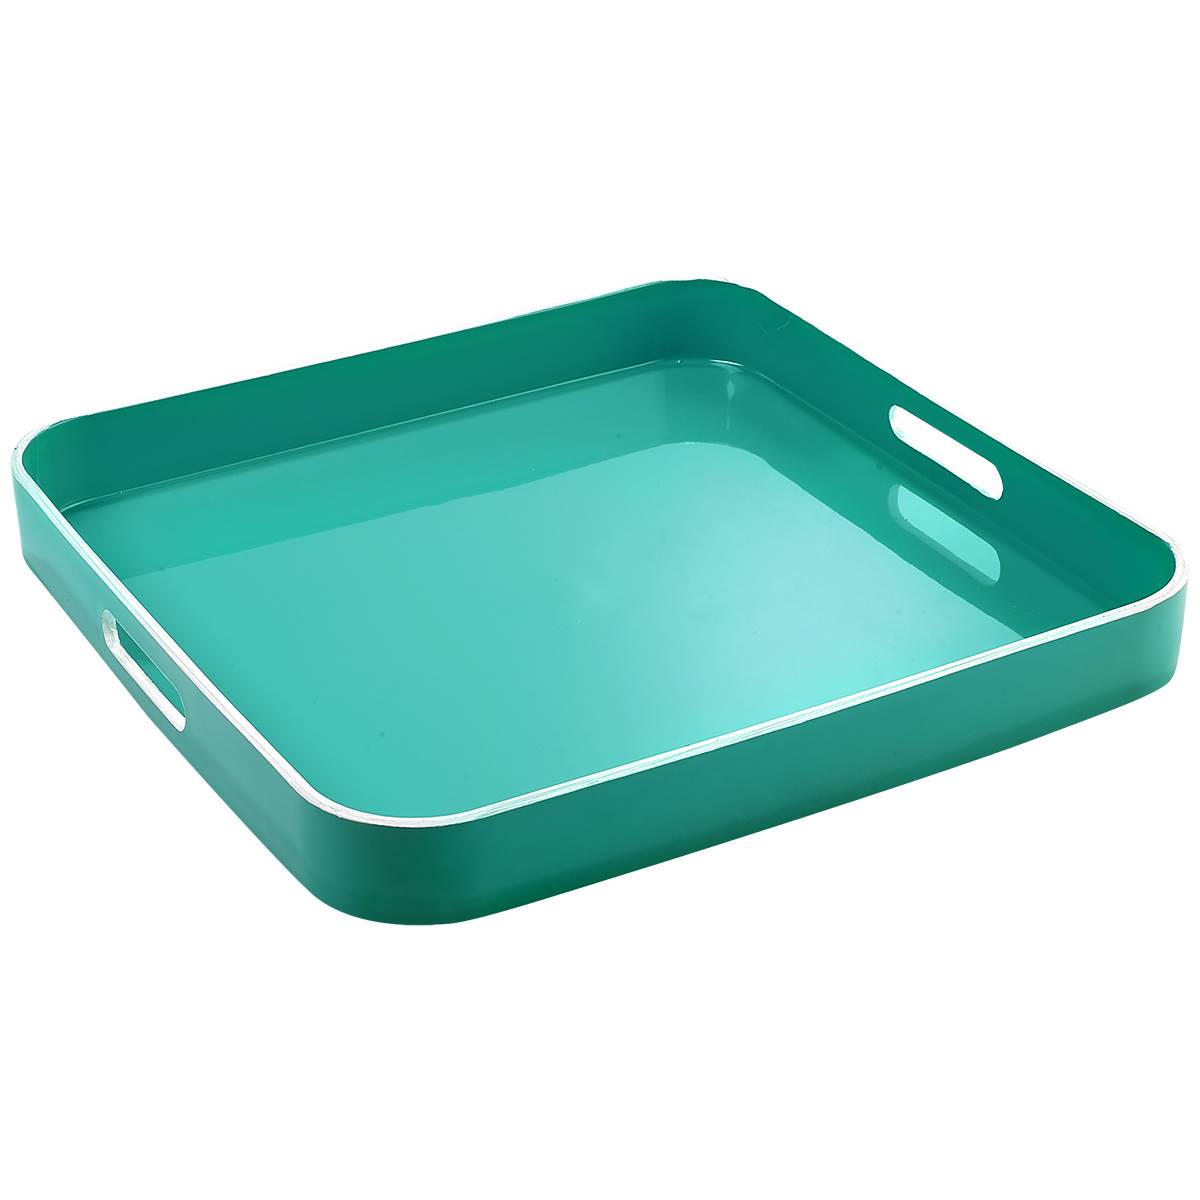 Jay Import Small Square Tray With Rim & Handle - Turquoise